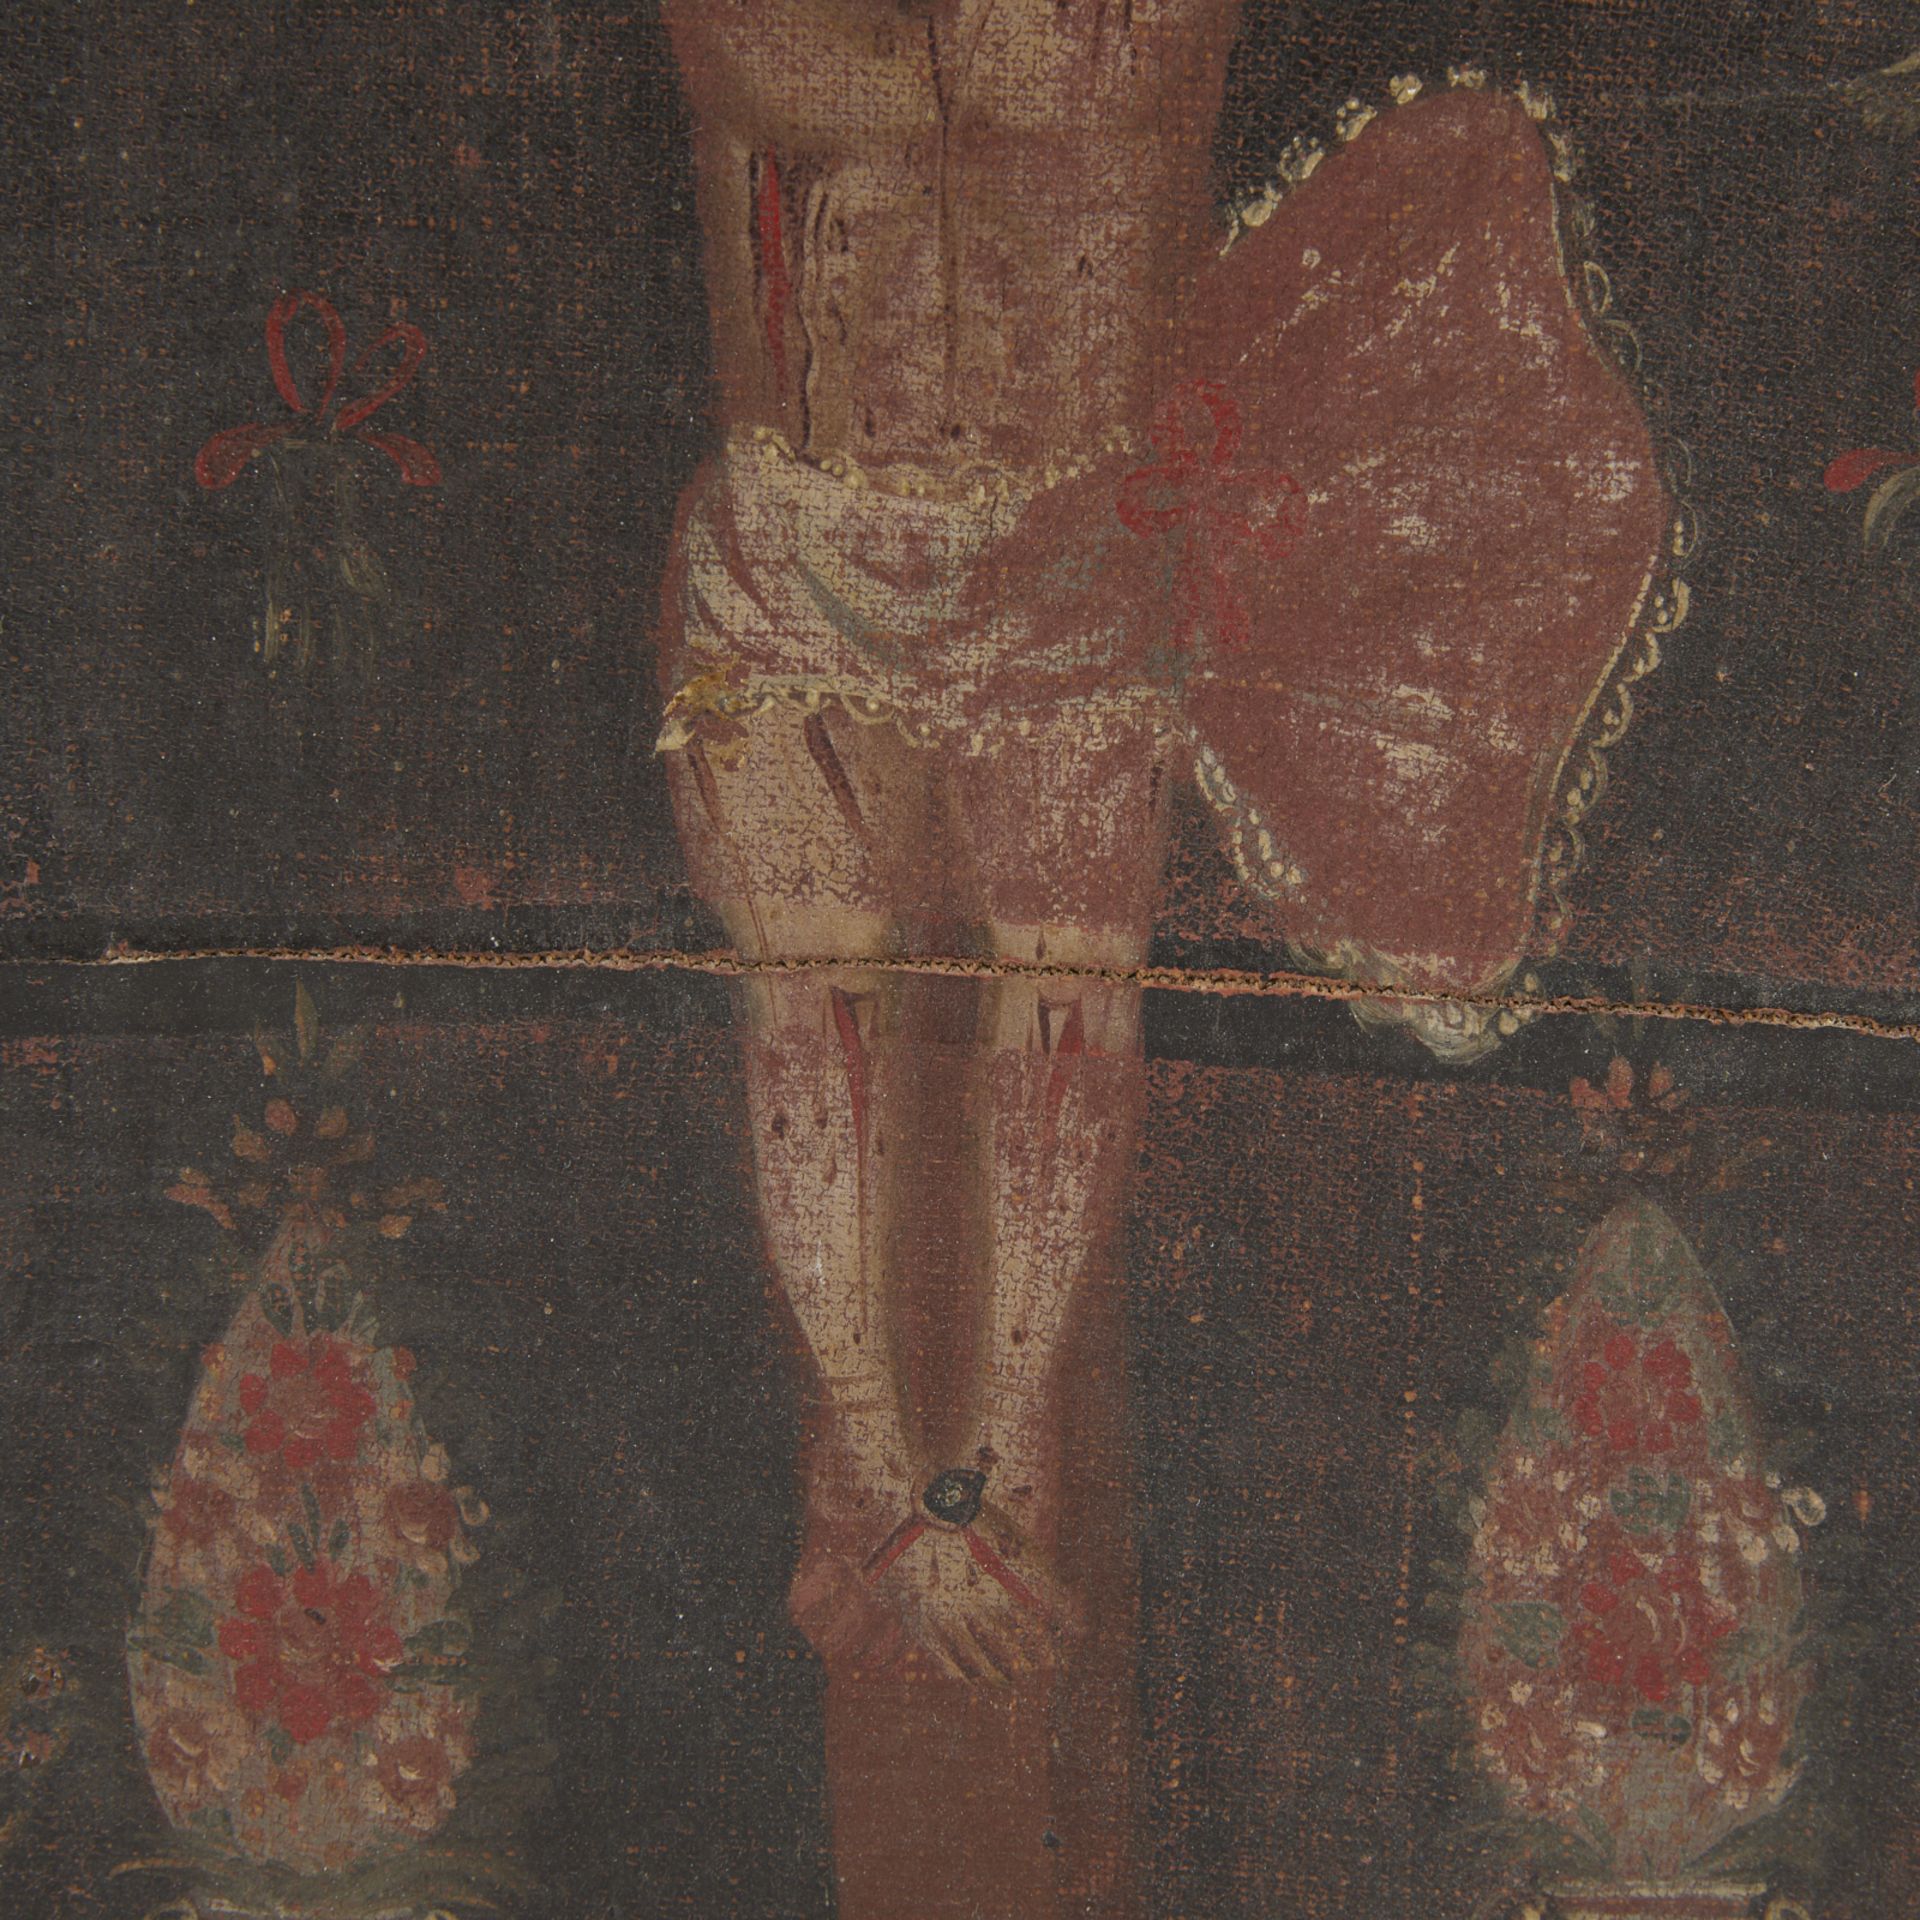 18th c. Spanish Colonial Crucifixion Painting - Image 7 of 10